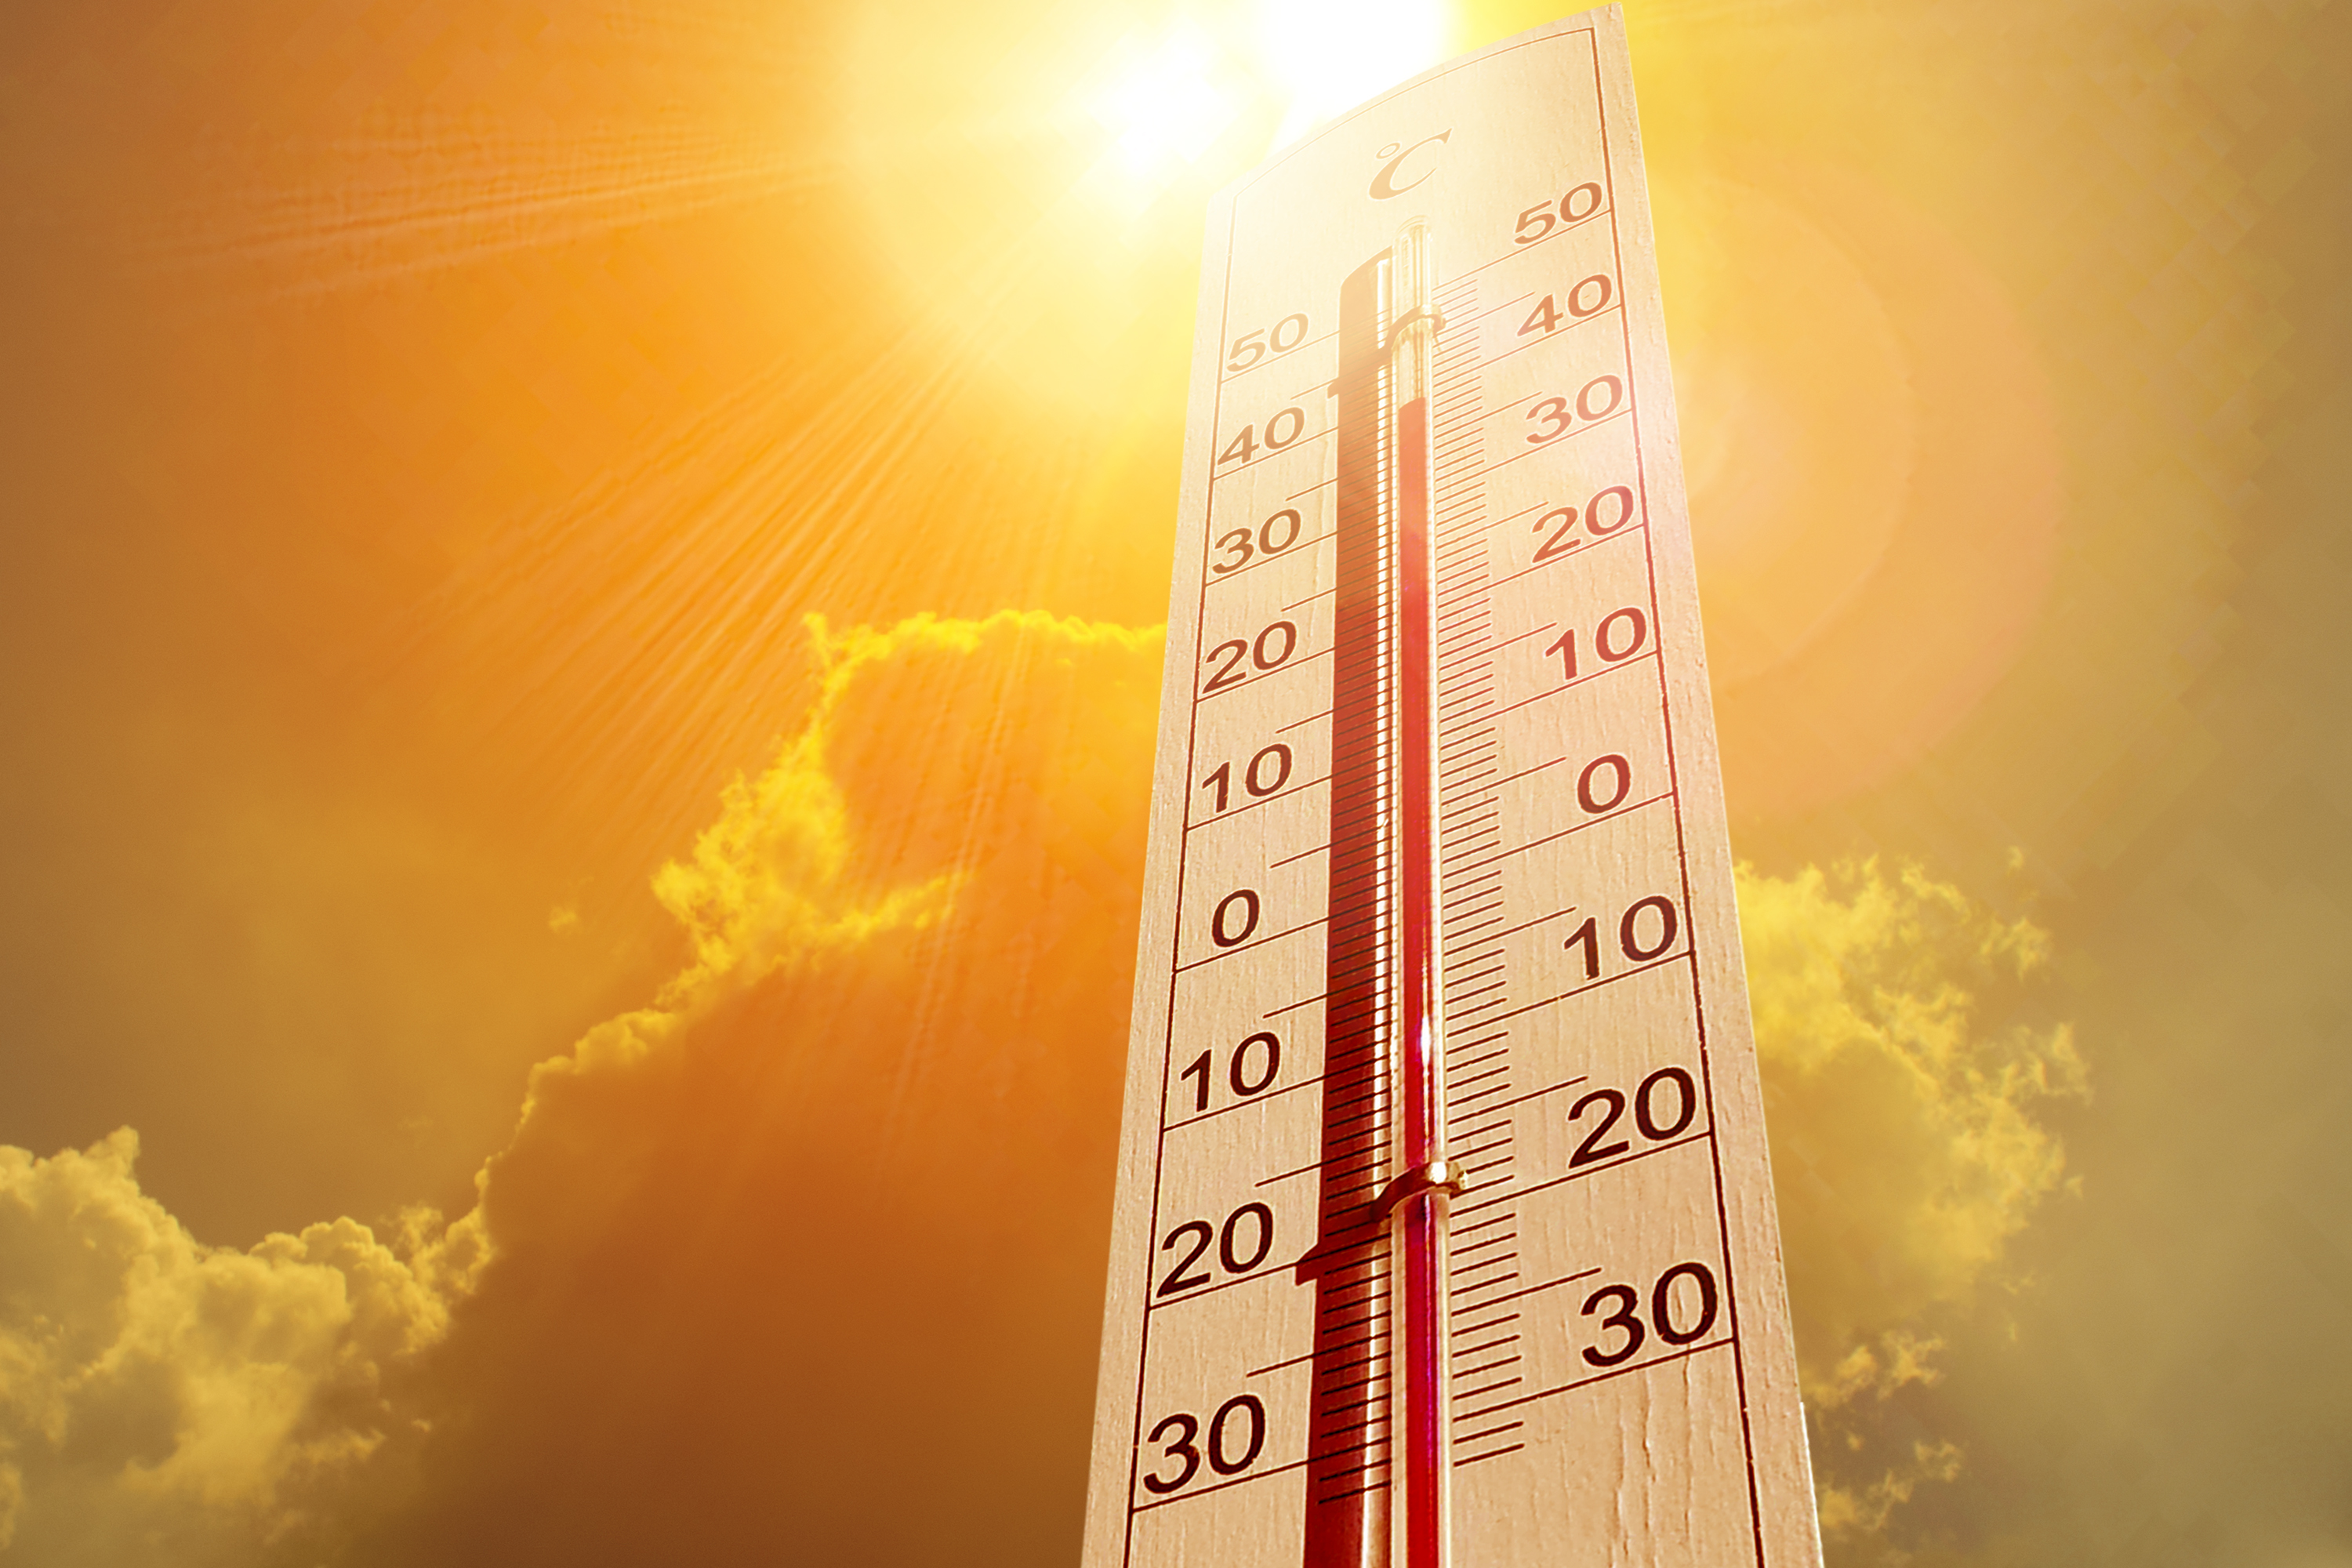 ORS News2Use - Beating the Heat